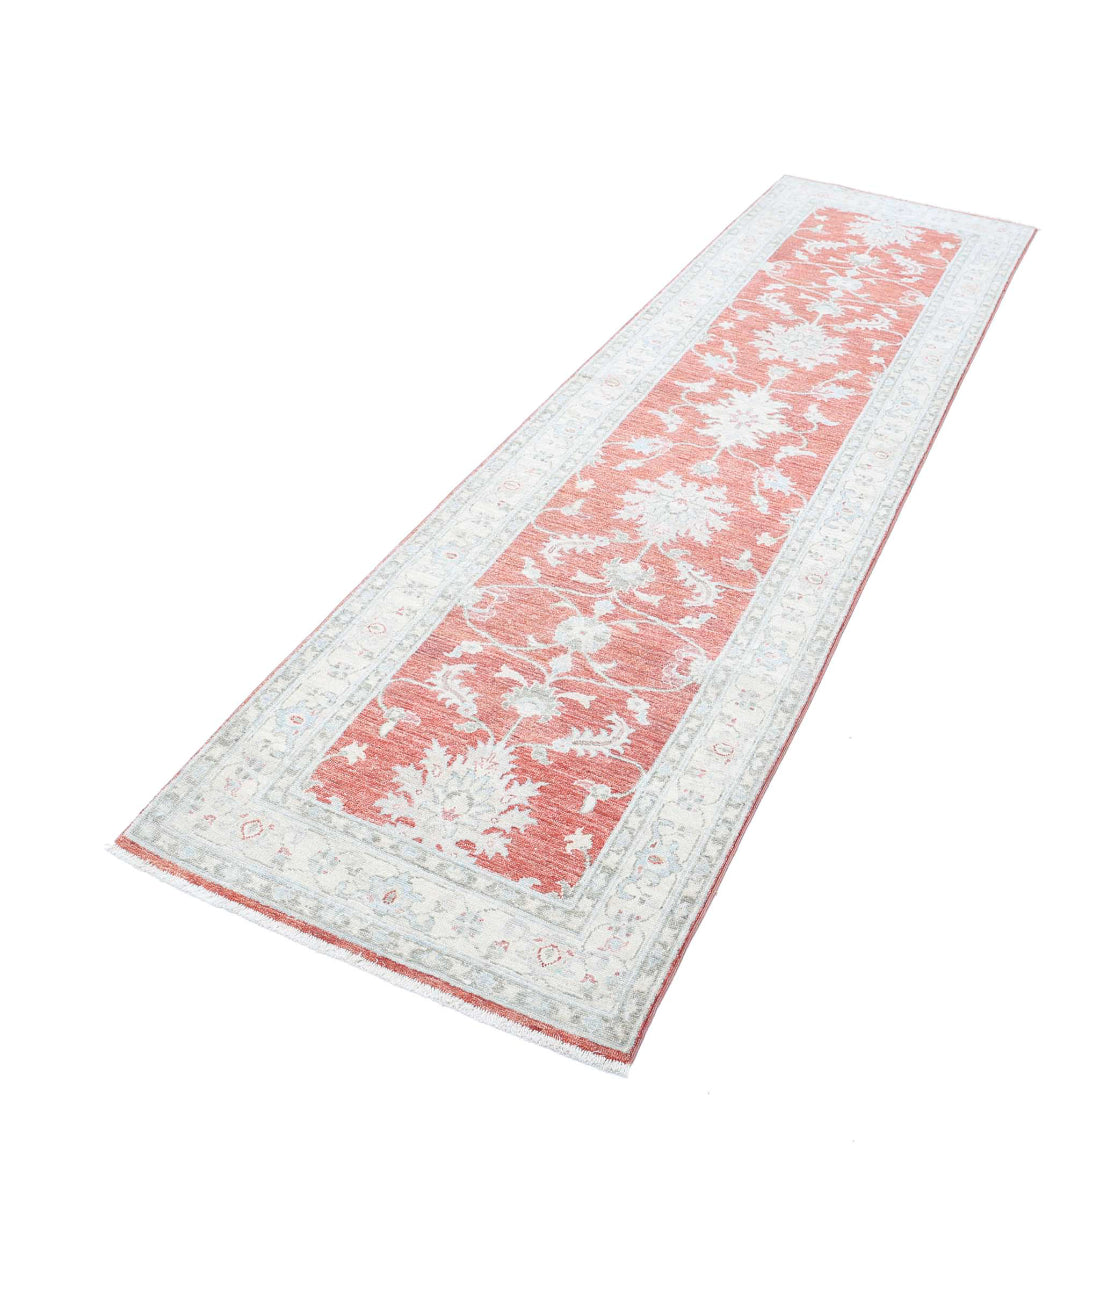 Ziegler 2'8'' X 9'7'' Hand-Knotted Wool Rug 2'8'' x 9'7'' (80 X 288) / Red / Ivory